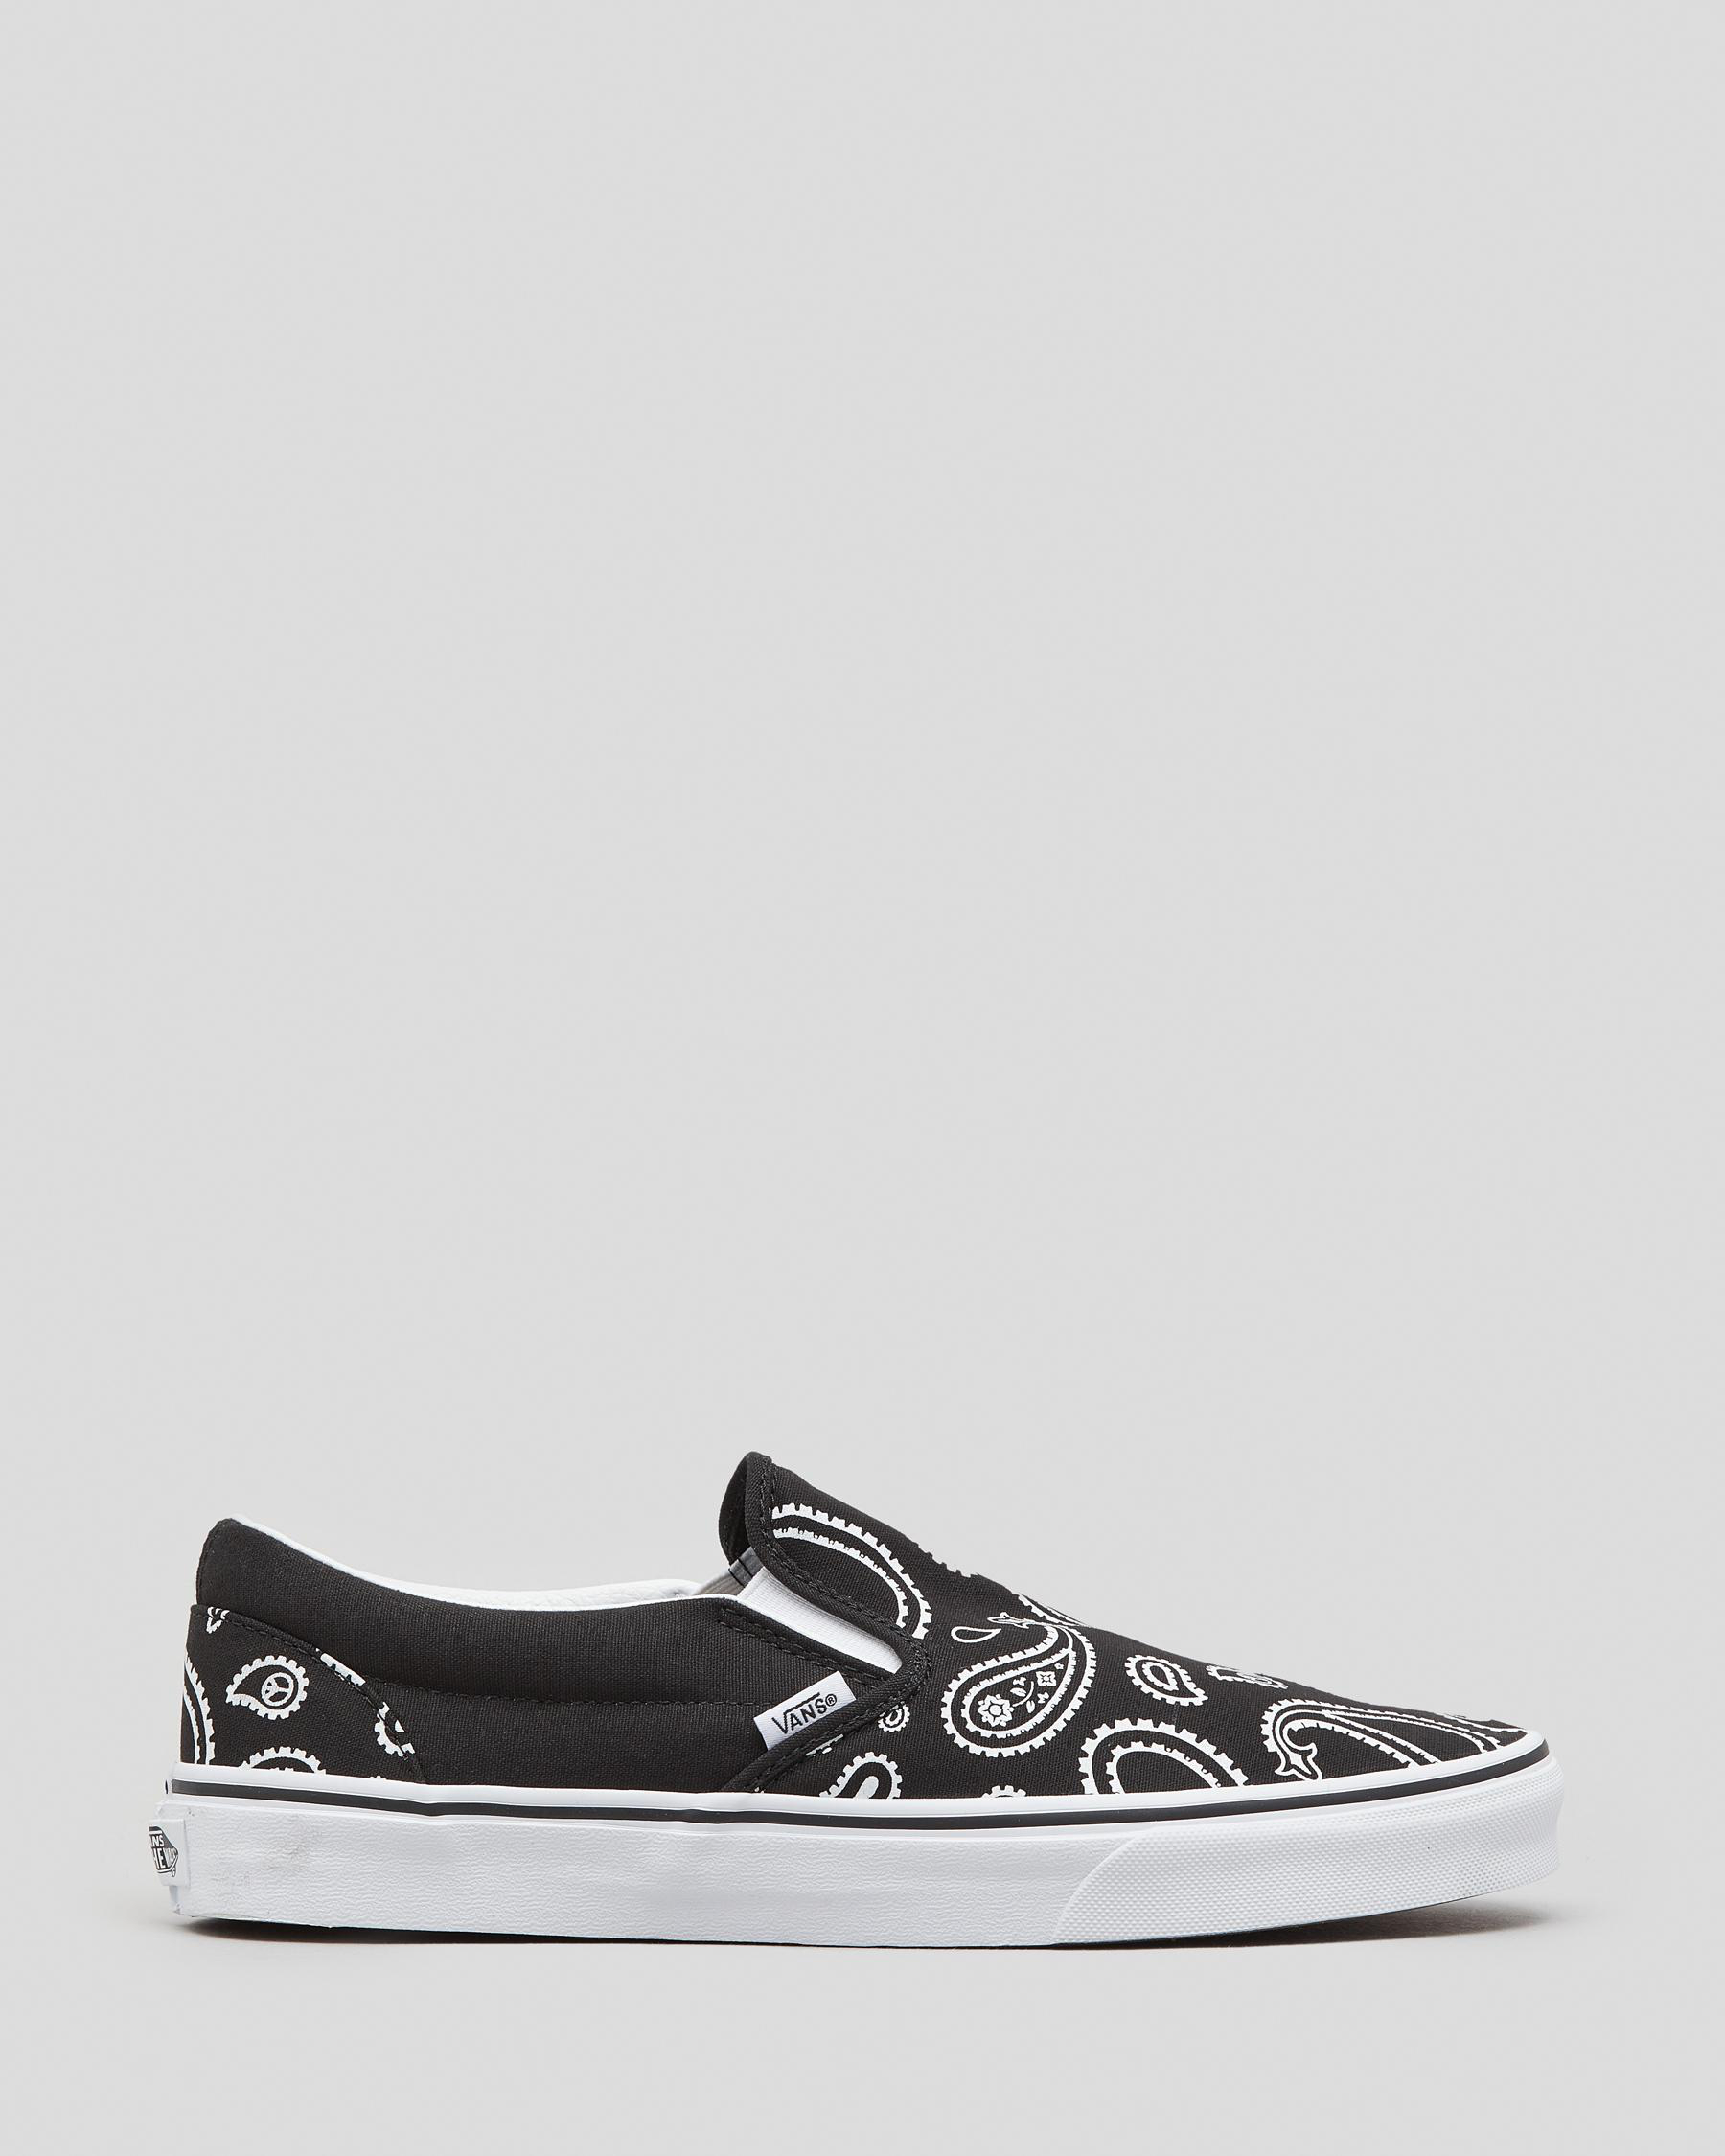 Vans Classic Slip-On Shoes In Black/true White - Fast Shipping & Easy ...